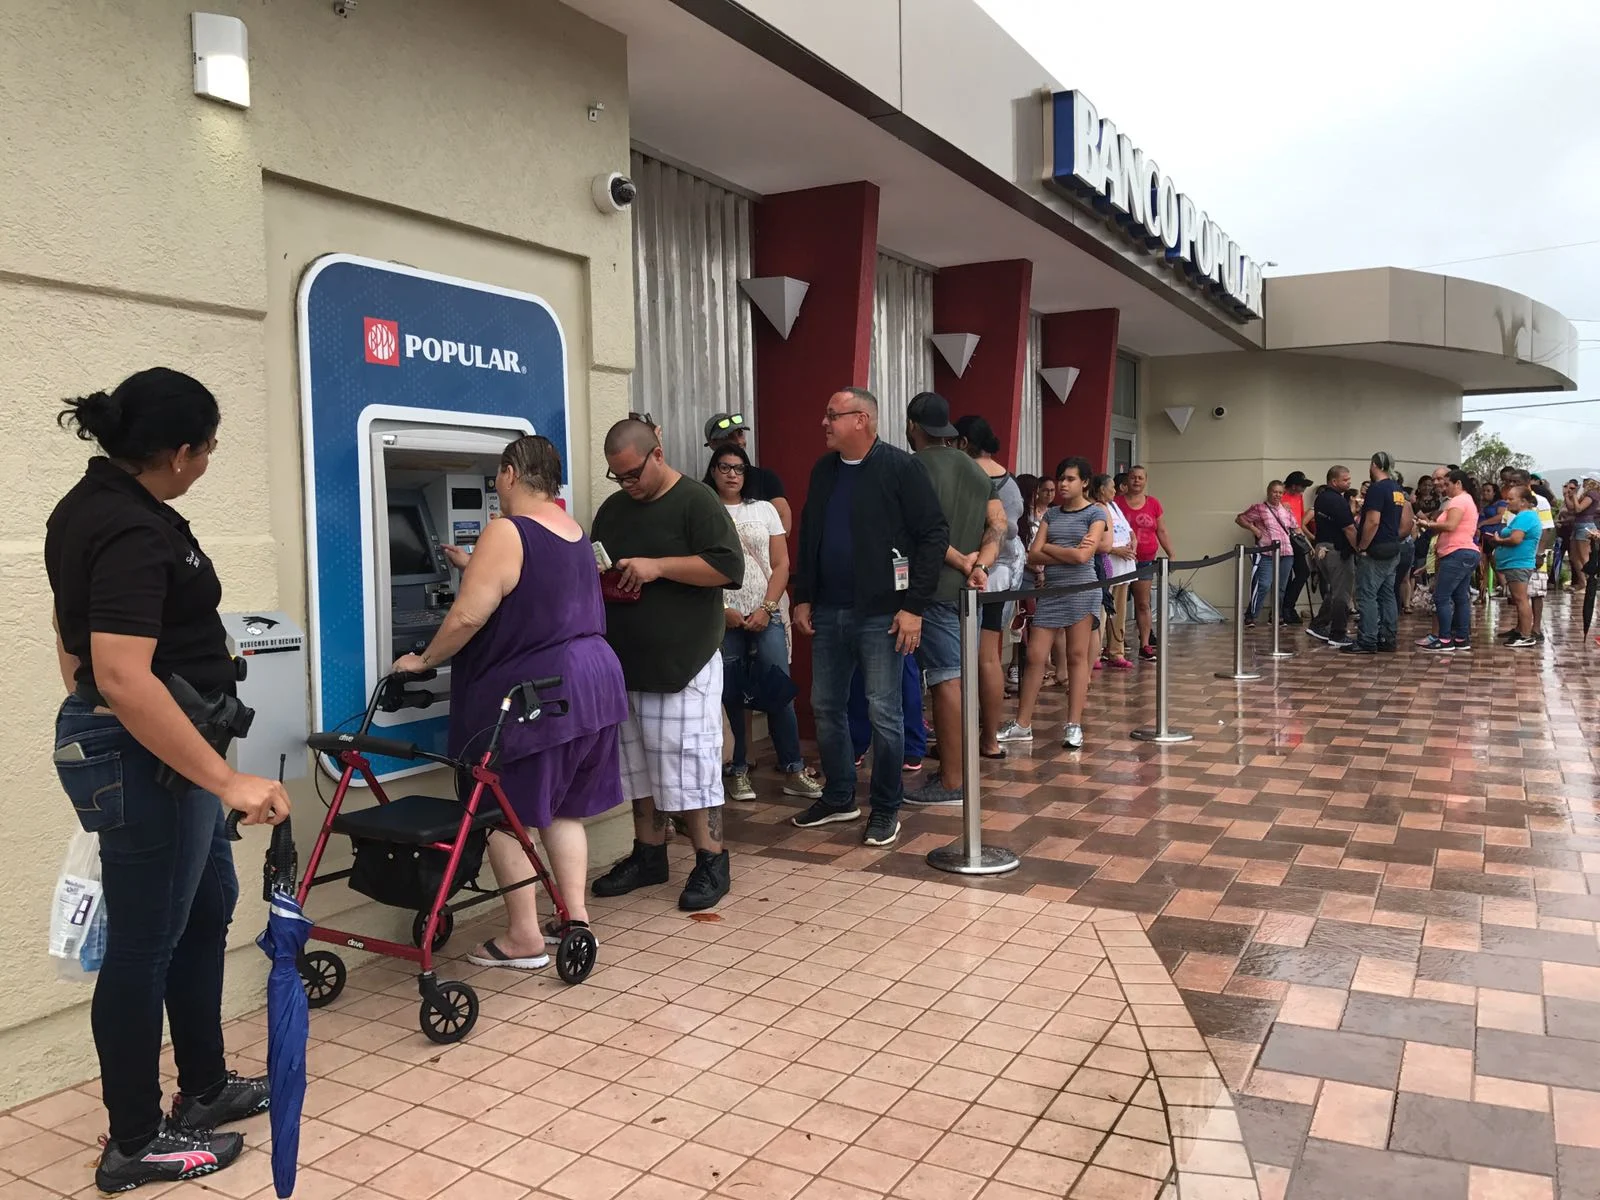 Residents of Ponce, Puerto Rico, line up at an ATM in hopes of getting some cash. More than a week after Hurricane Maria struck, residents are waiting in long lines to withdraw money and for gasoline